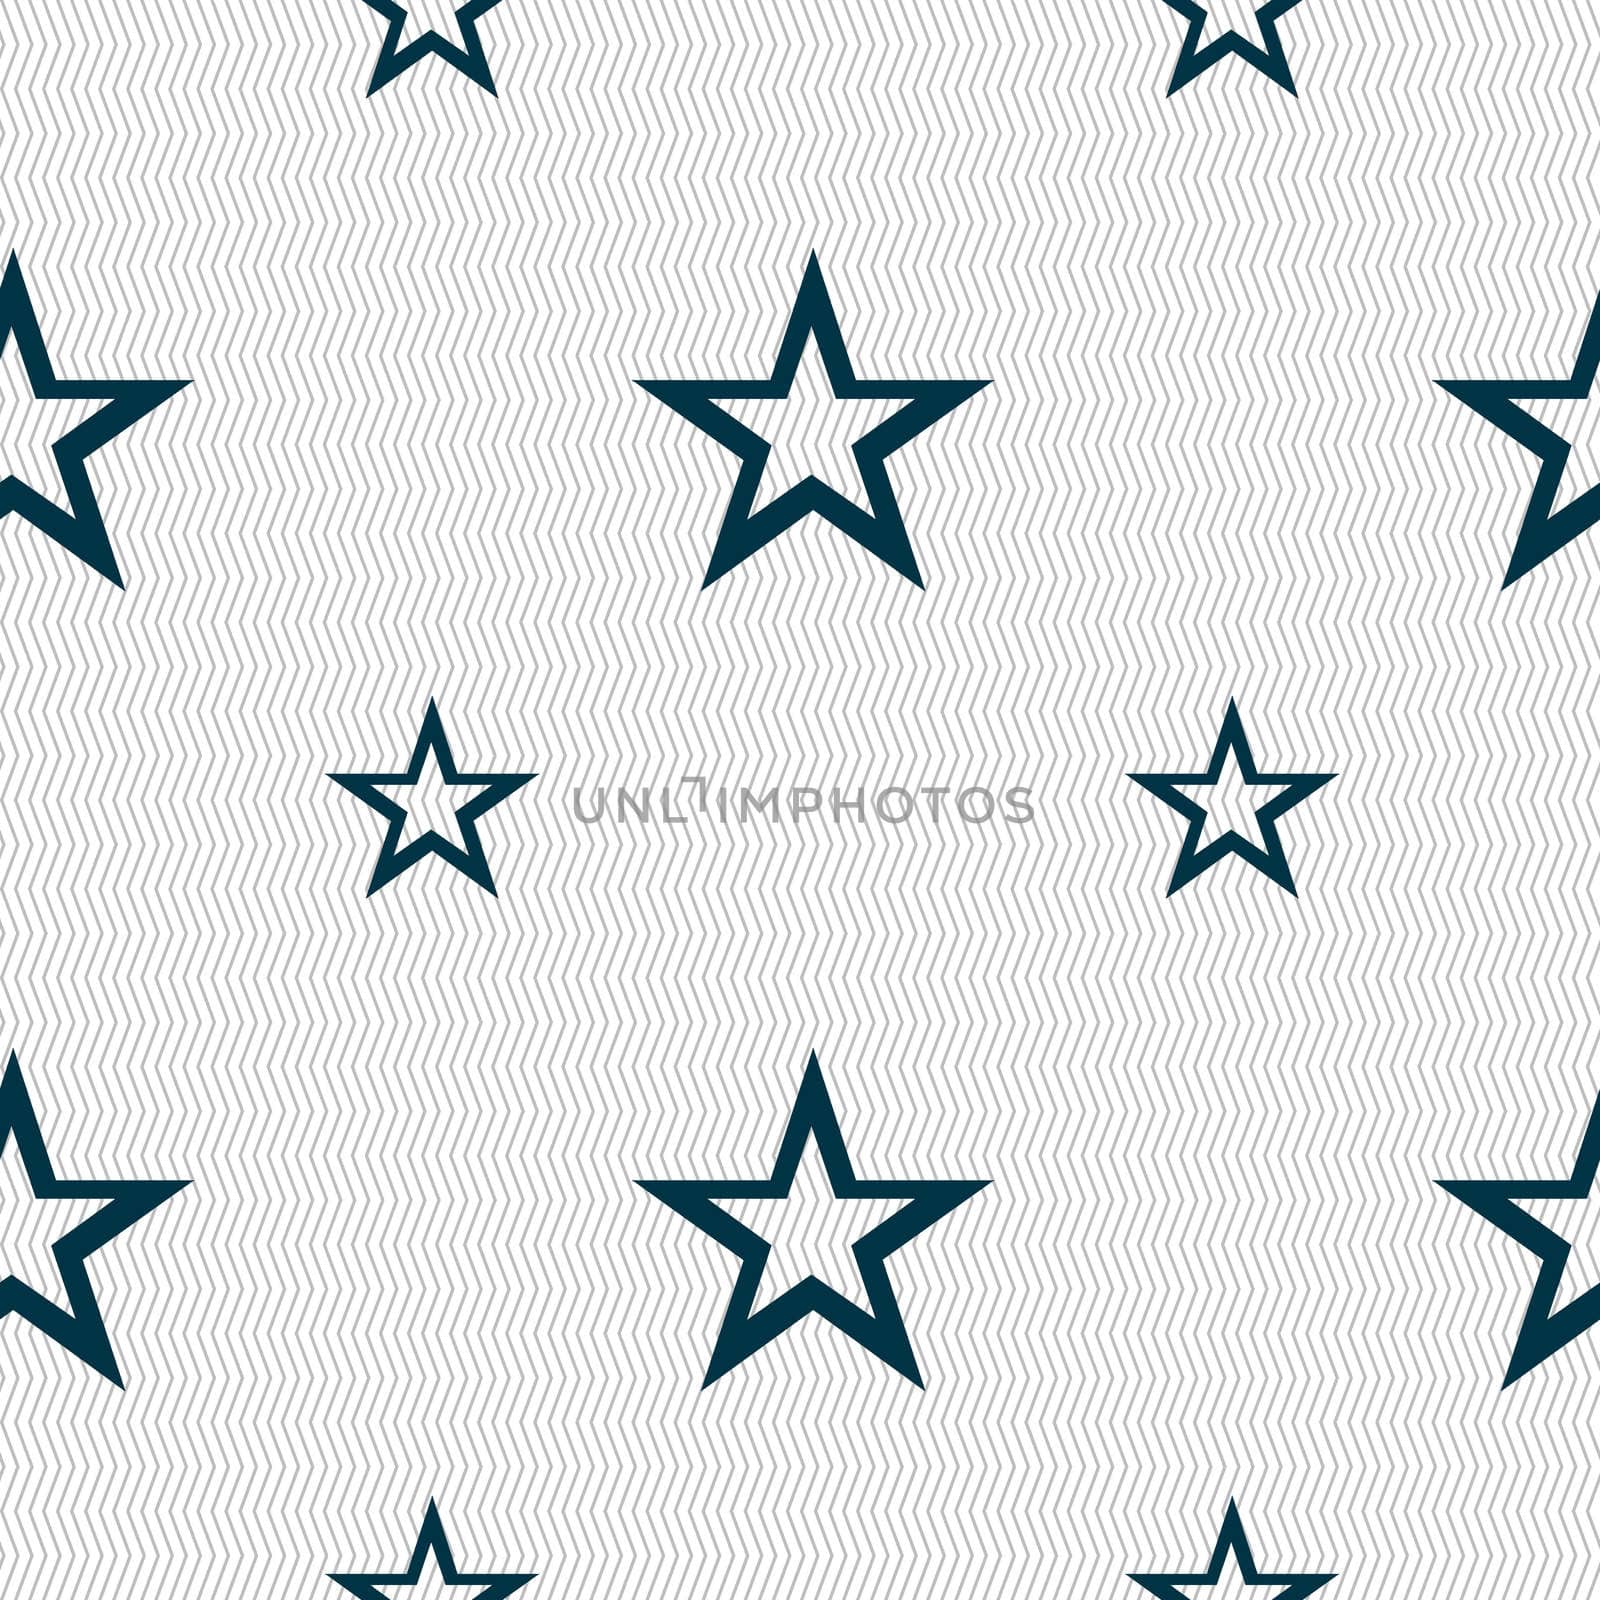 Star sign icon. Favorite button. Navigation symbol. Seamless pattern with geometric texture. illustration